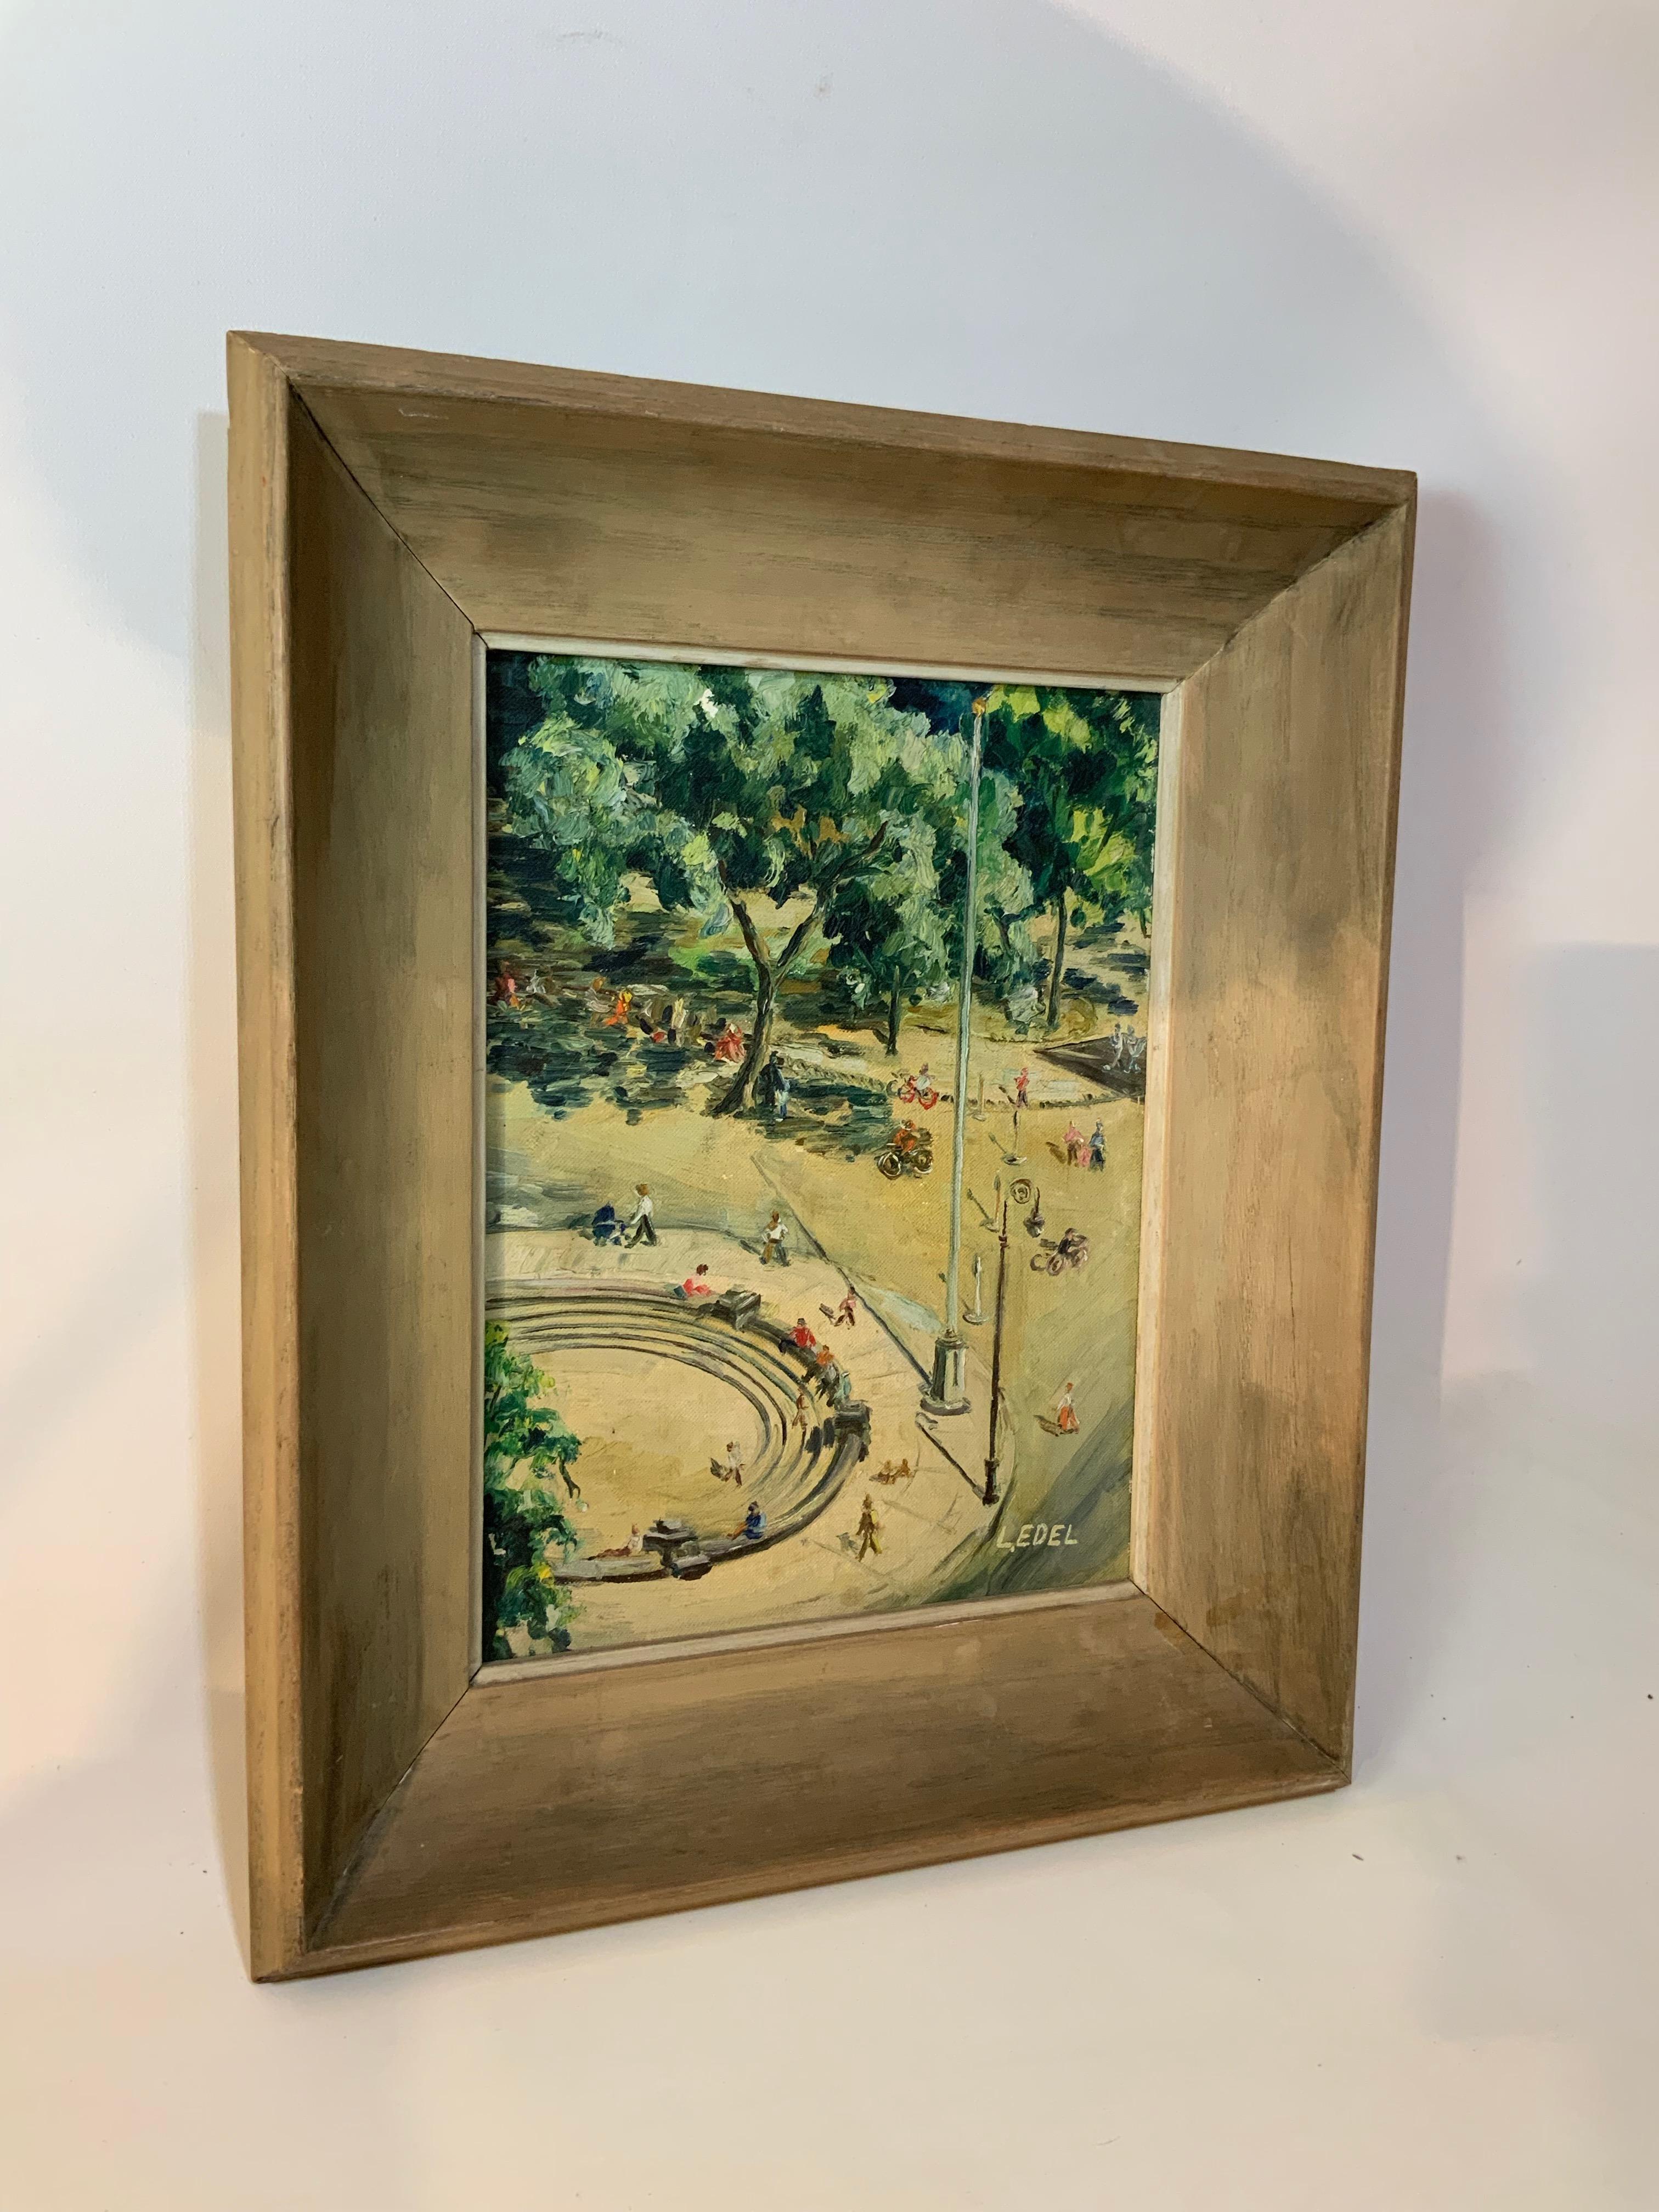 Leonore Edel created this fine little oil painting on canvas board in the 1950s from her apartment at 61 Washington Square Park South. The fun and amusement of a bright sunny day is captured at a time when The West Village was brimming with art,